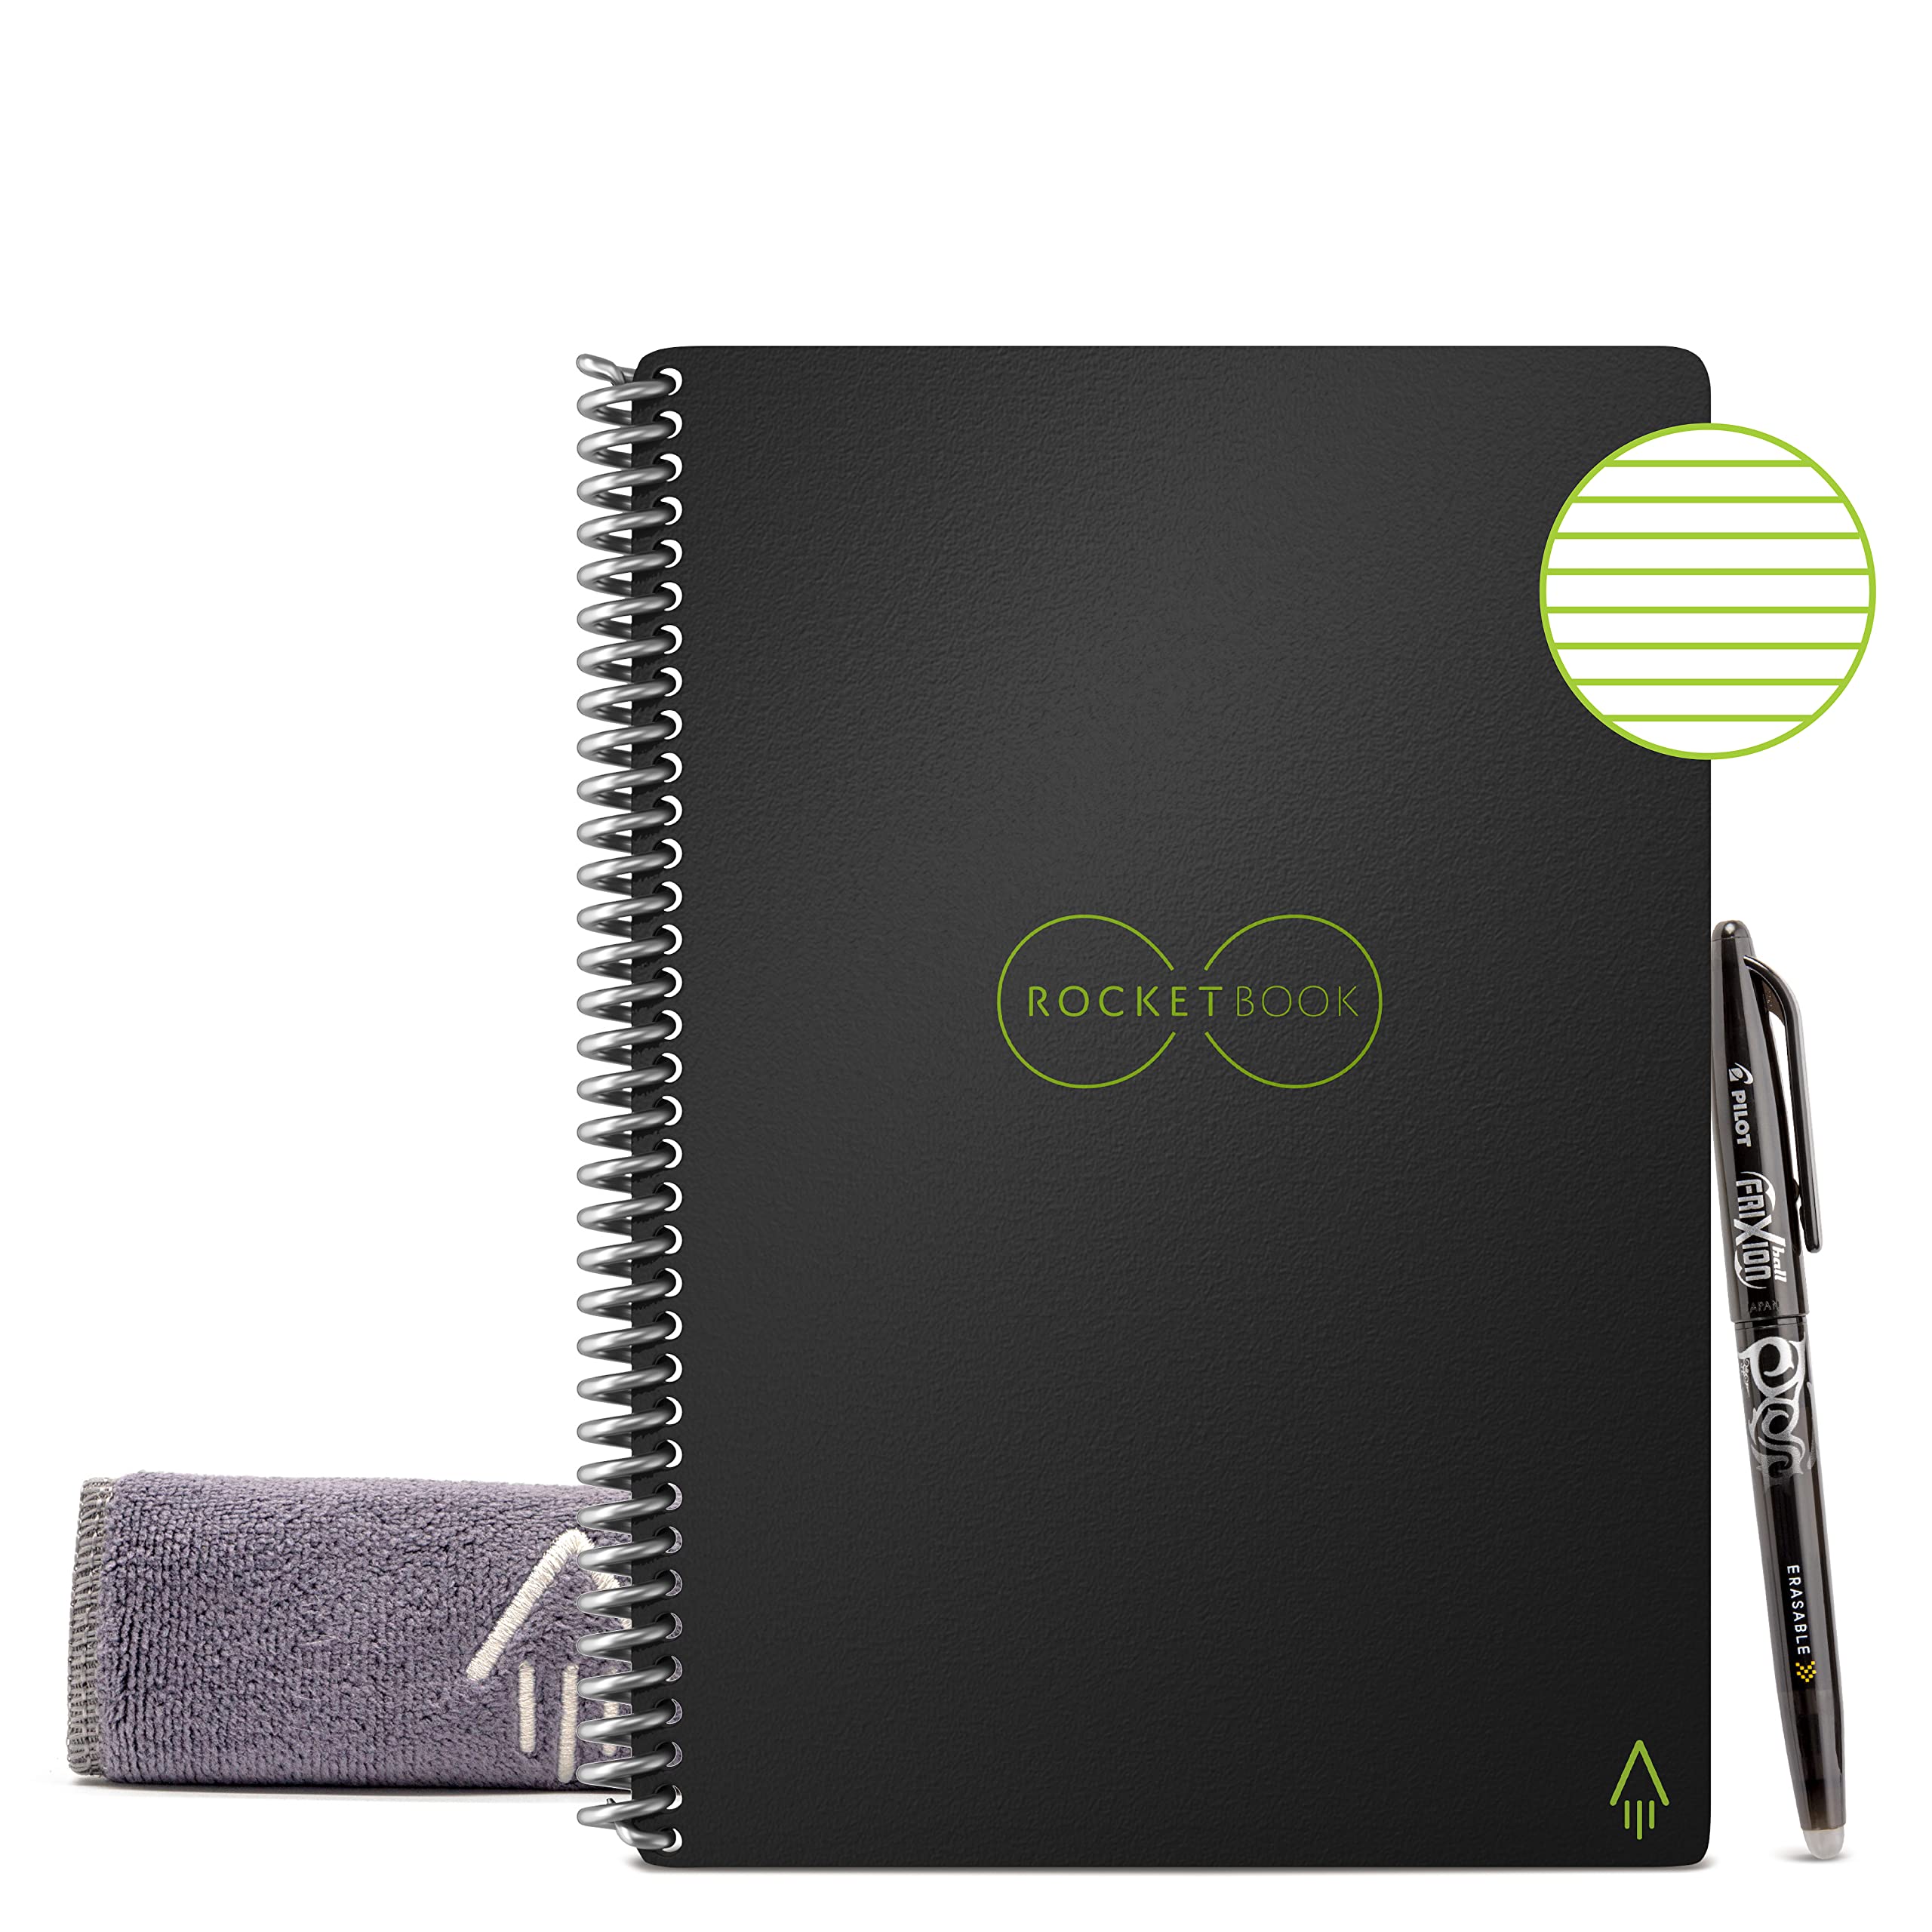 Rocketbook Core Reusable Smart Notebook | Innovative, Eco-Friendly, Digitally Connected Notebook with Cloud Sharing Capabilities | Lined, 8.5" x 11", 36 Pg, Infinity Blac $23.99